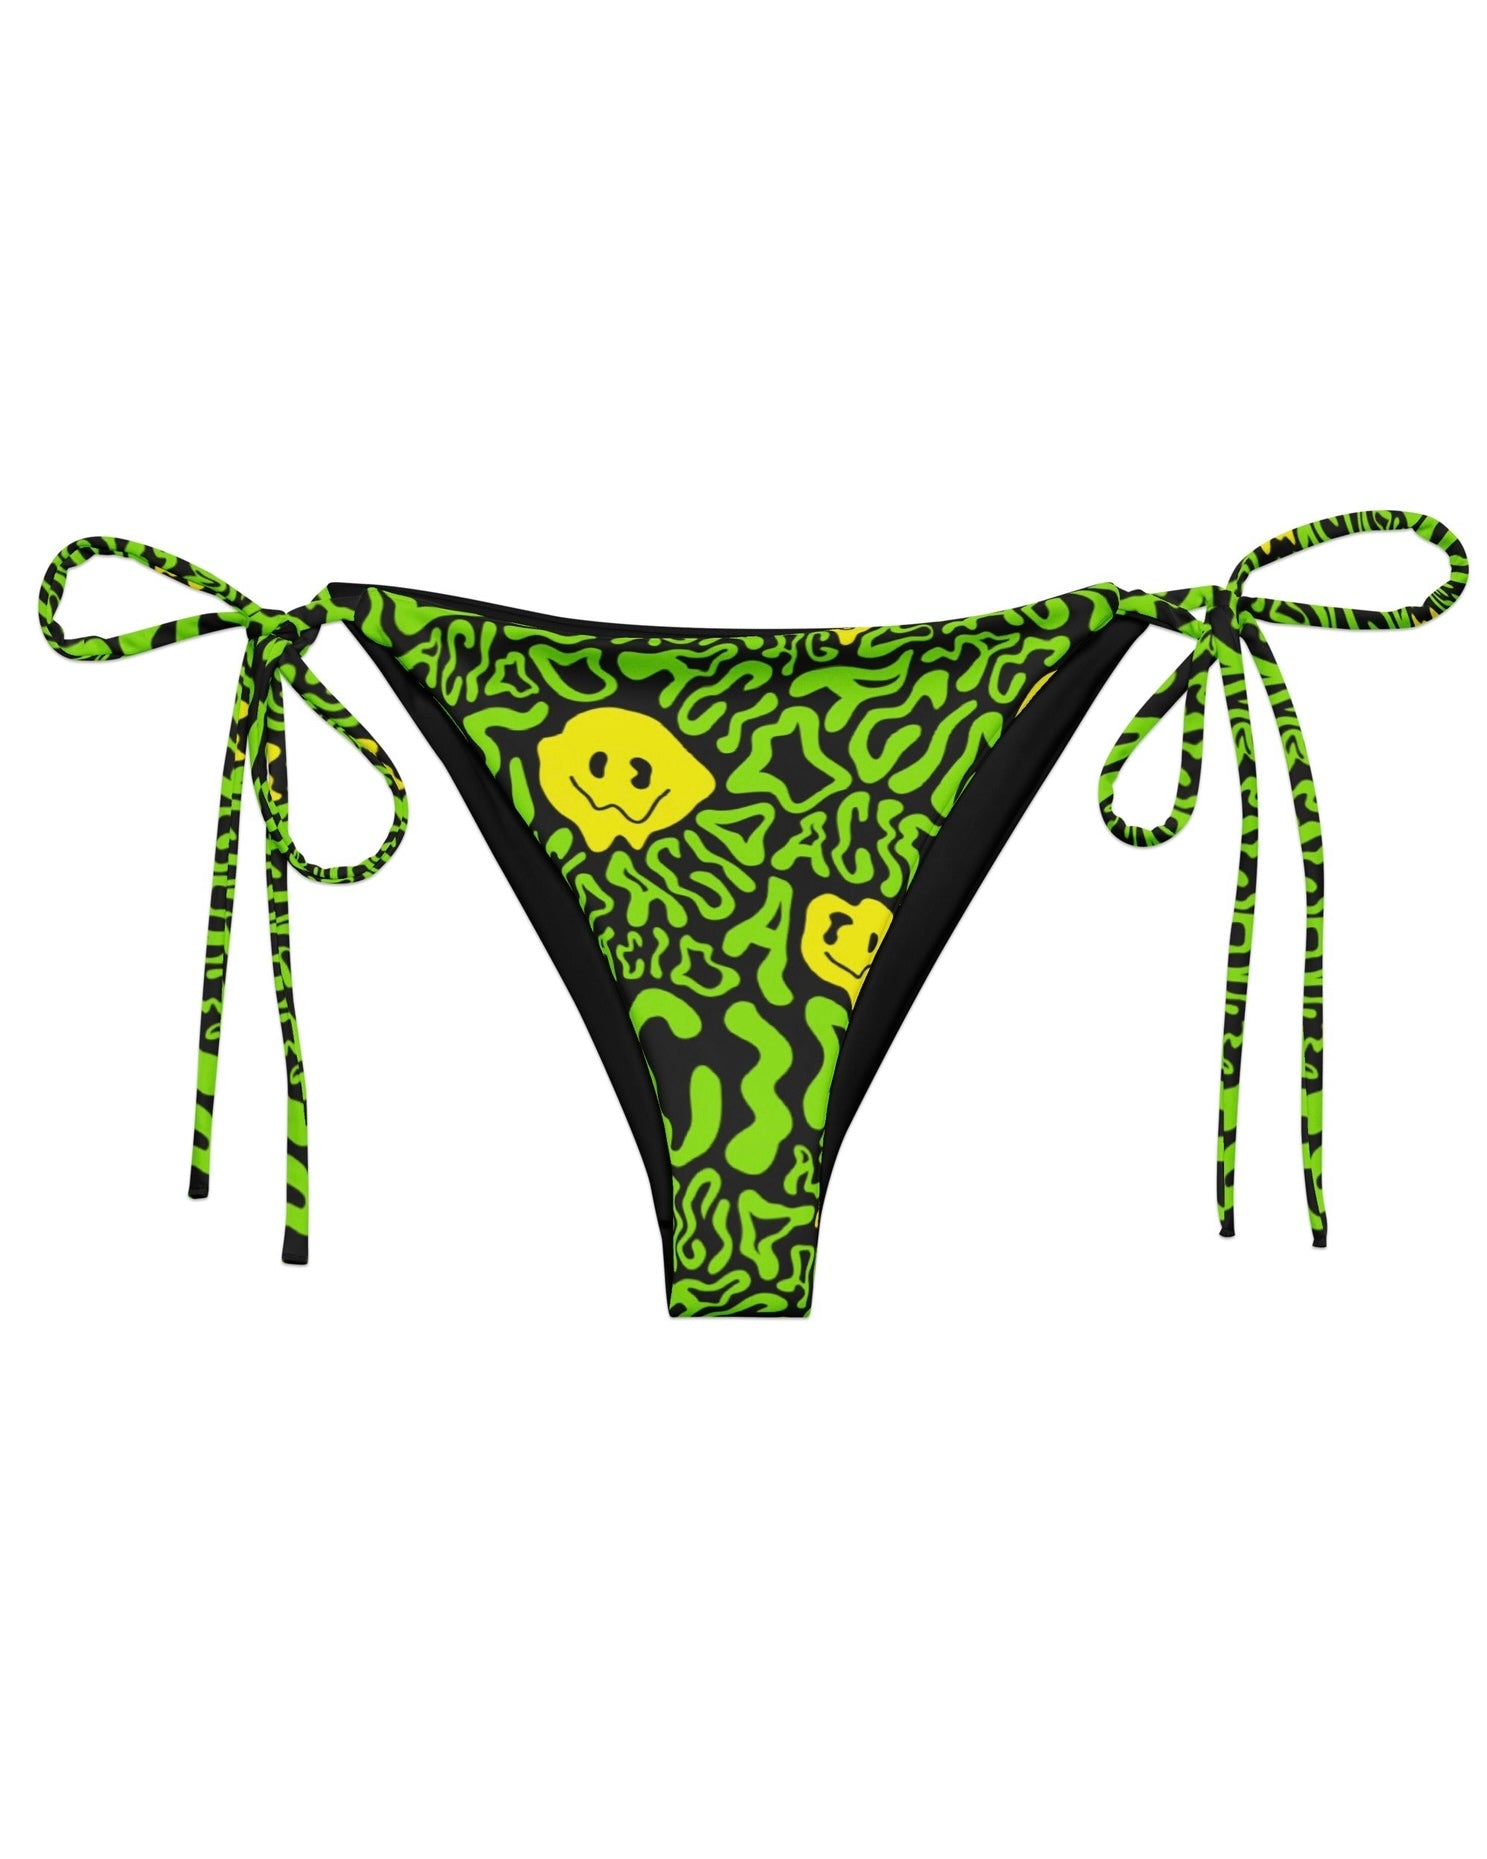 Acid Smilez String Bottoms by One Stop Rave on a white background.